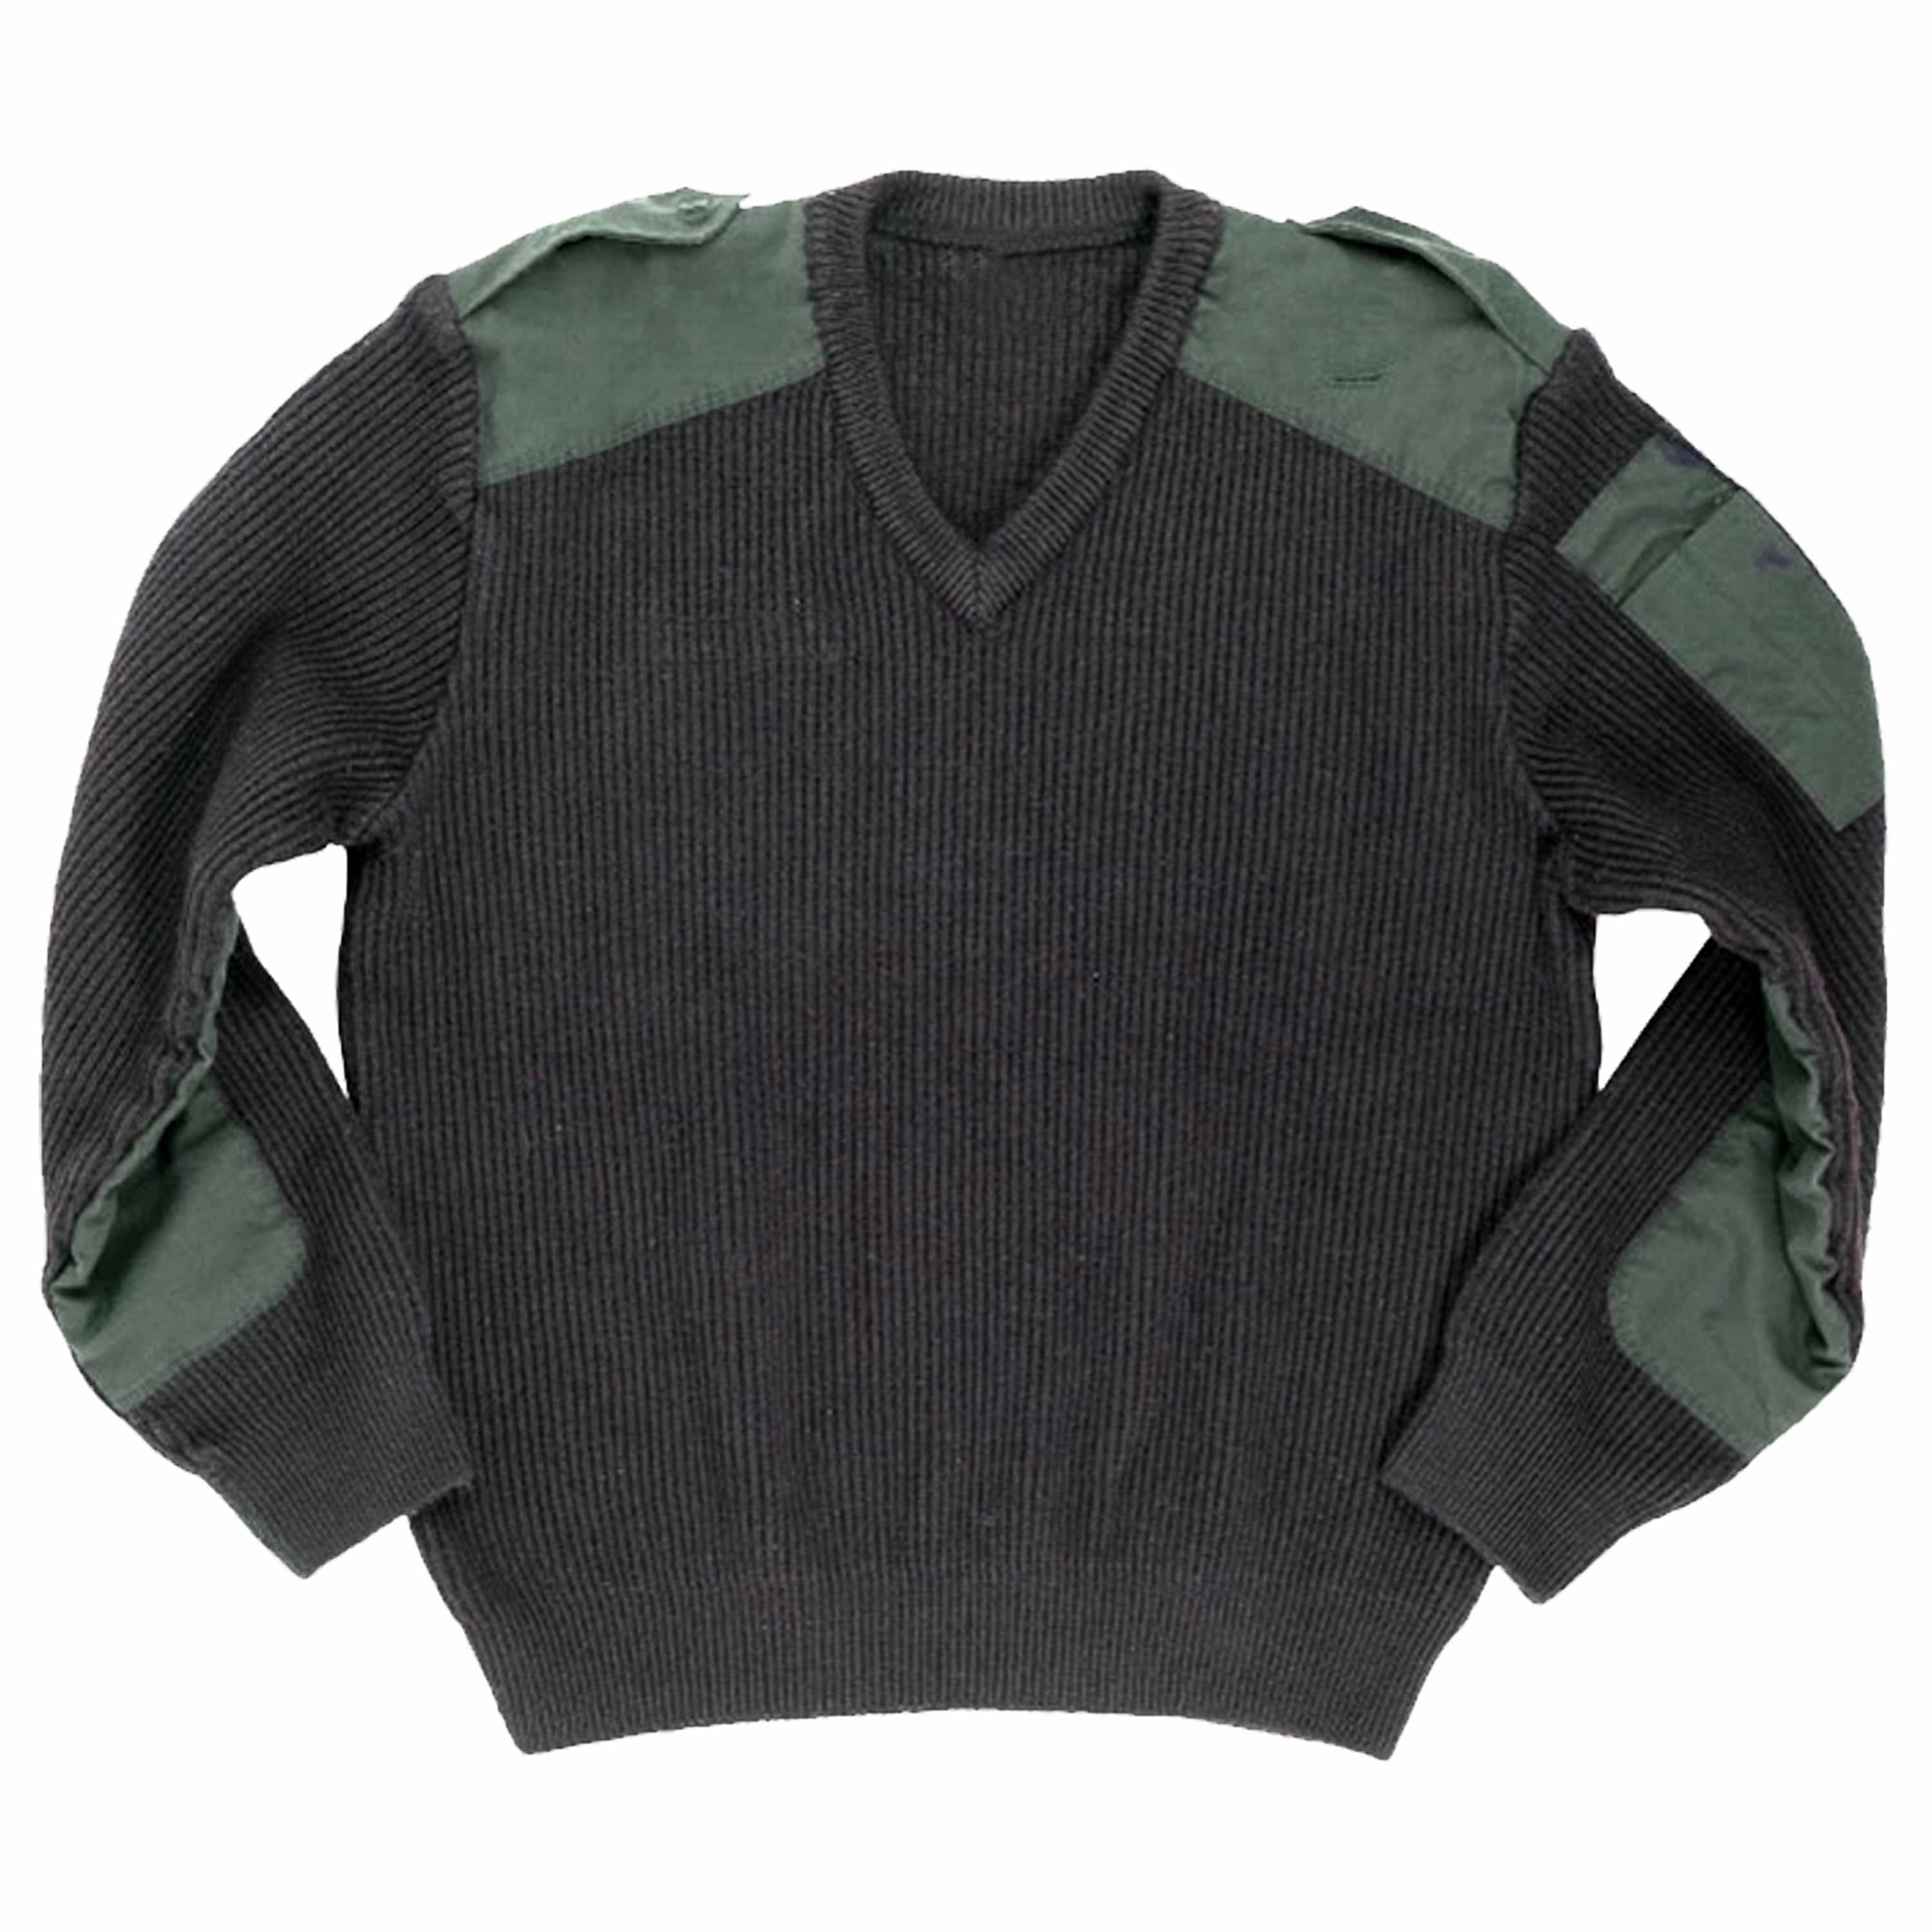 Armée Allemande style pull vert olive-Commando Militaire Pullover Sweater Top